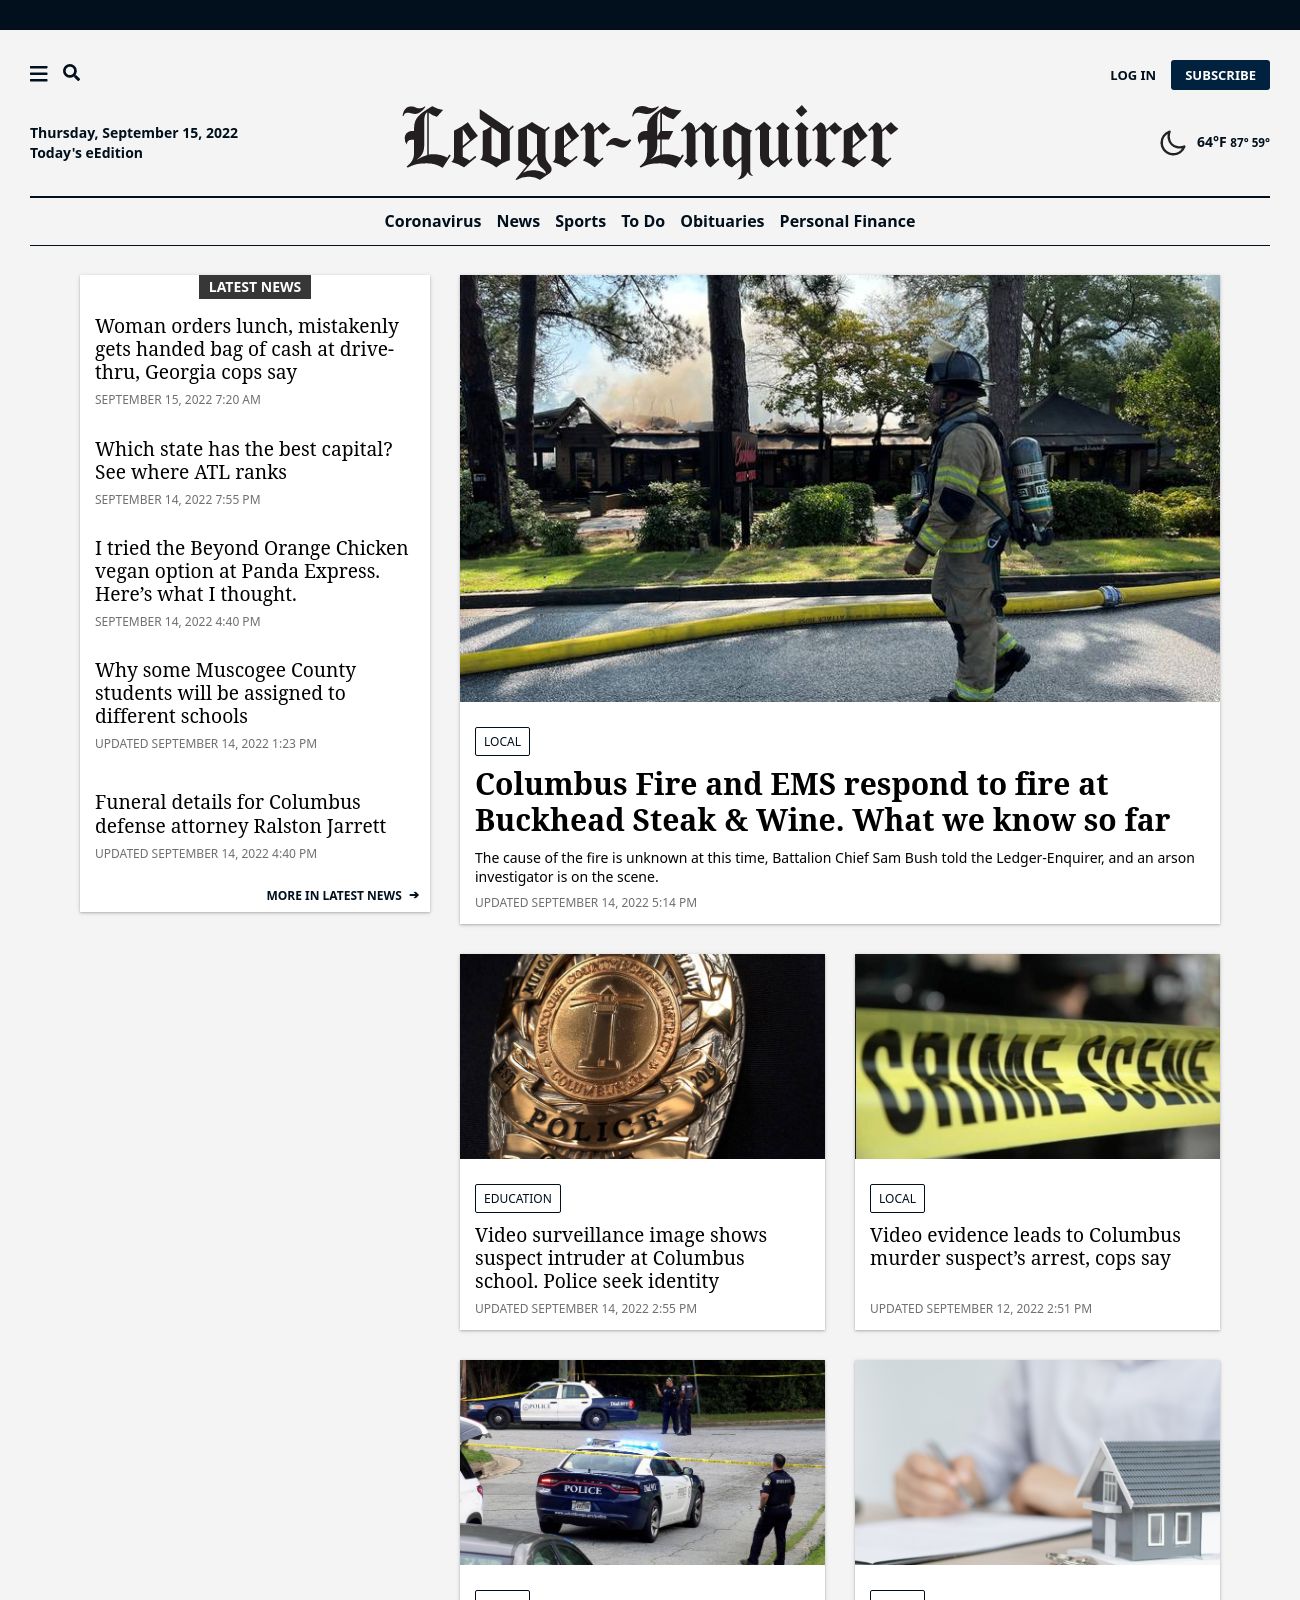 The Ledger-Enquirer at 2022-09-15 08:03:35-04:00 local time